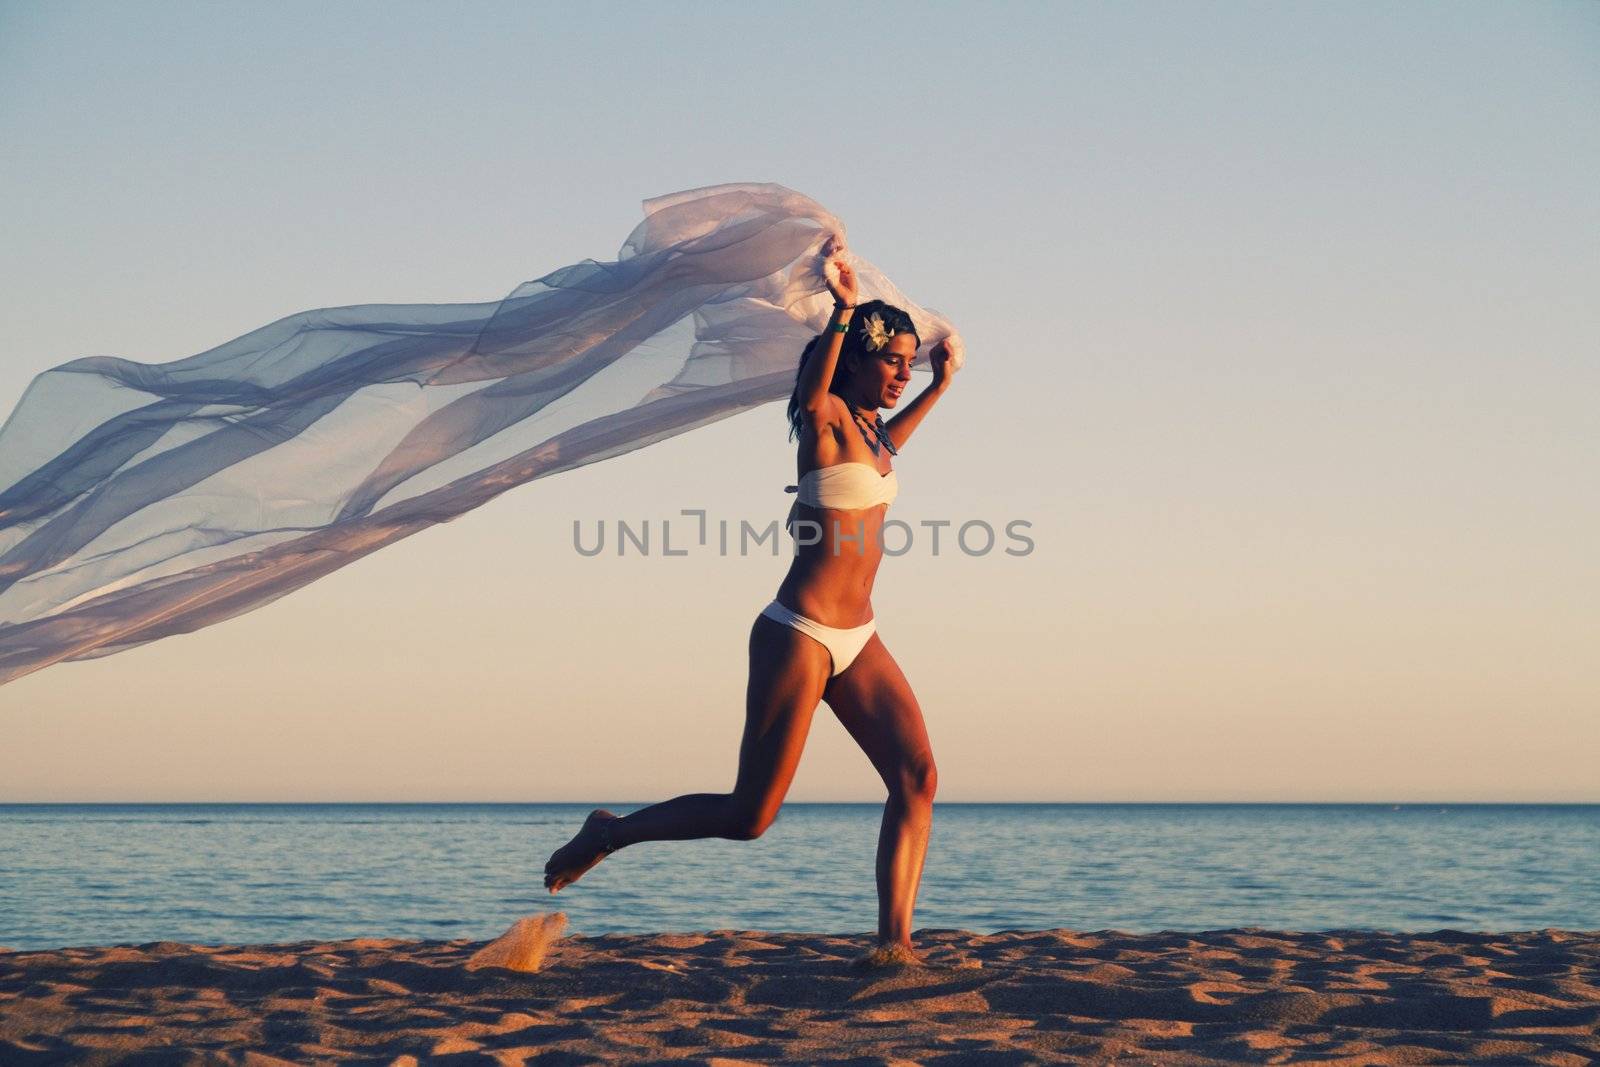 View of a beautiful young girl with a white bikini running on the beach.